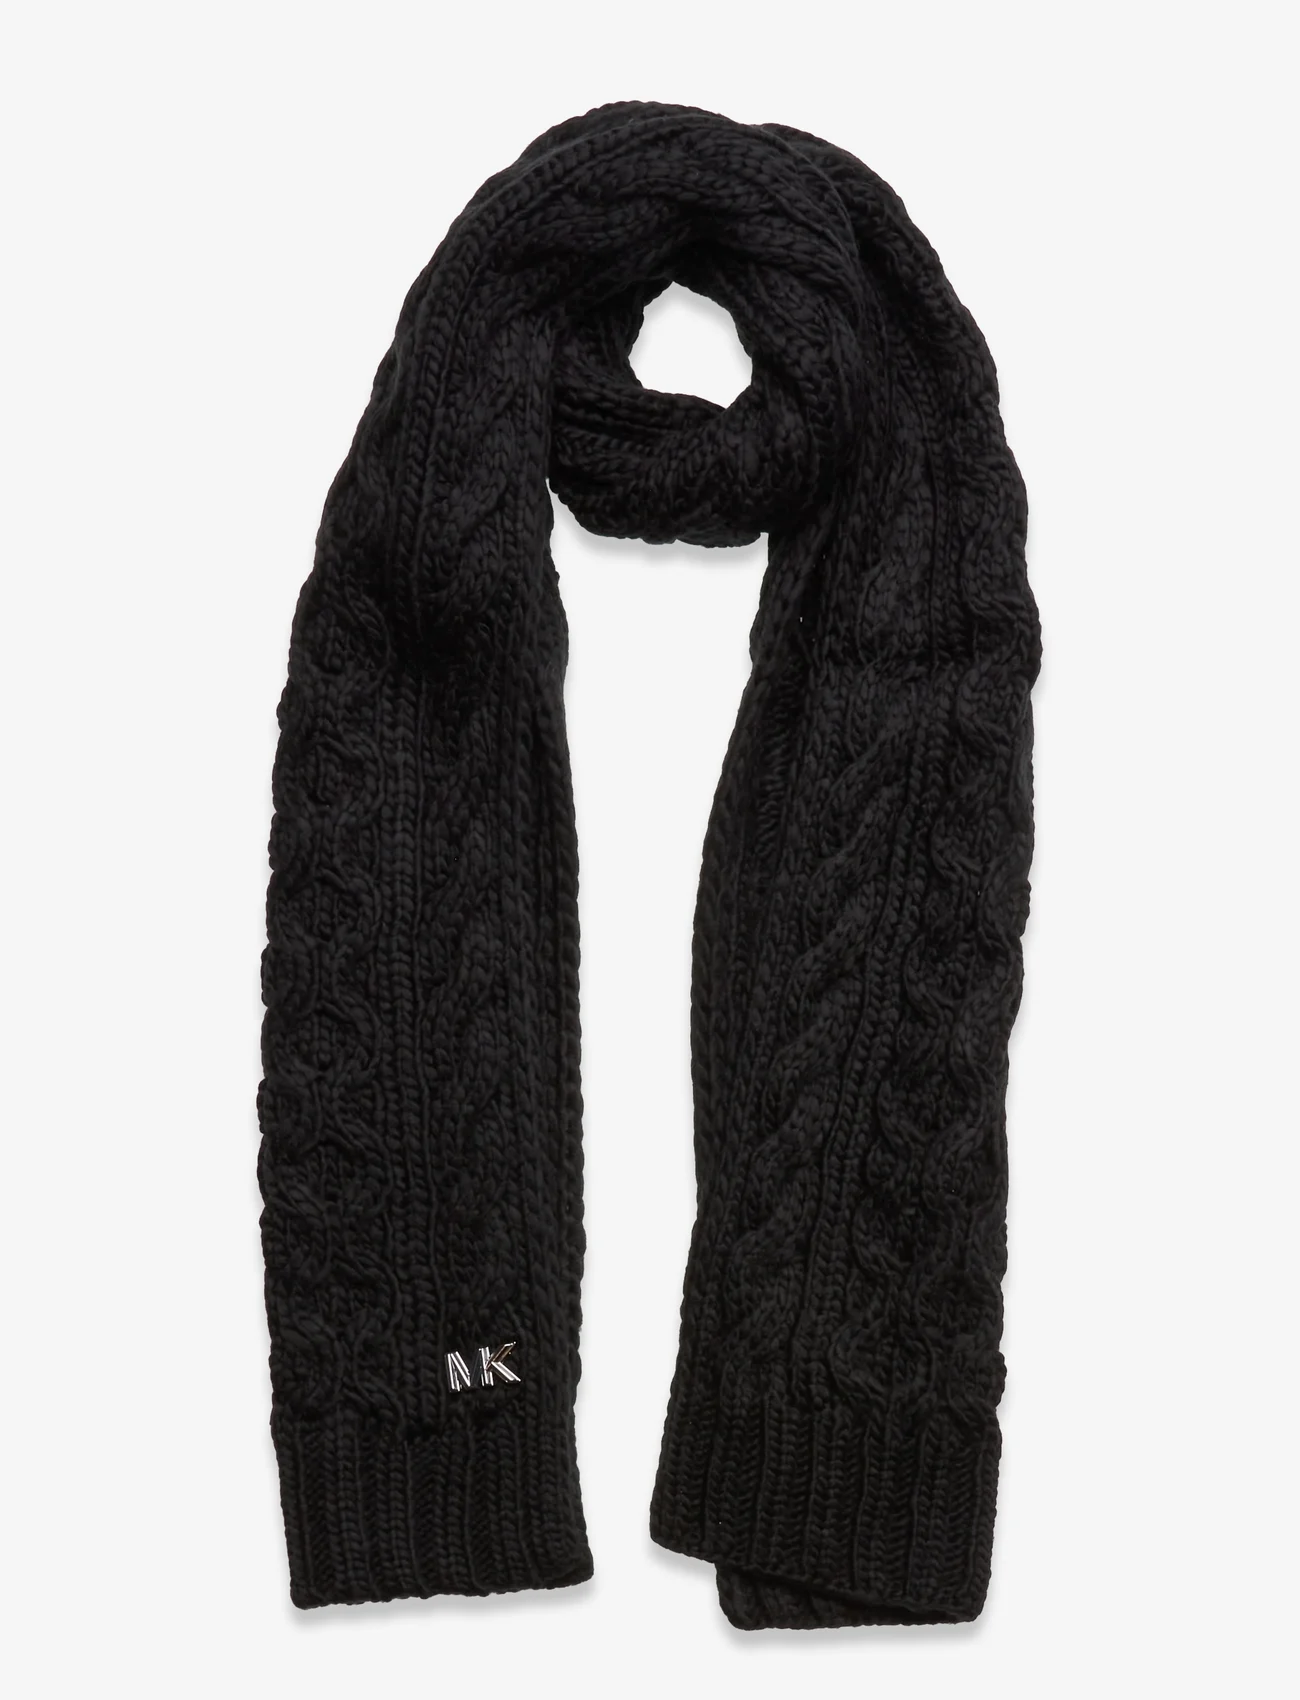 Michael Kors Accessories - Honeycomb cable scarf - wintersjaals - black - 0